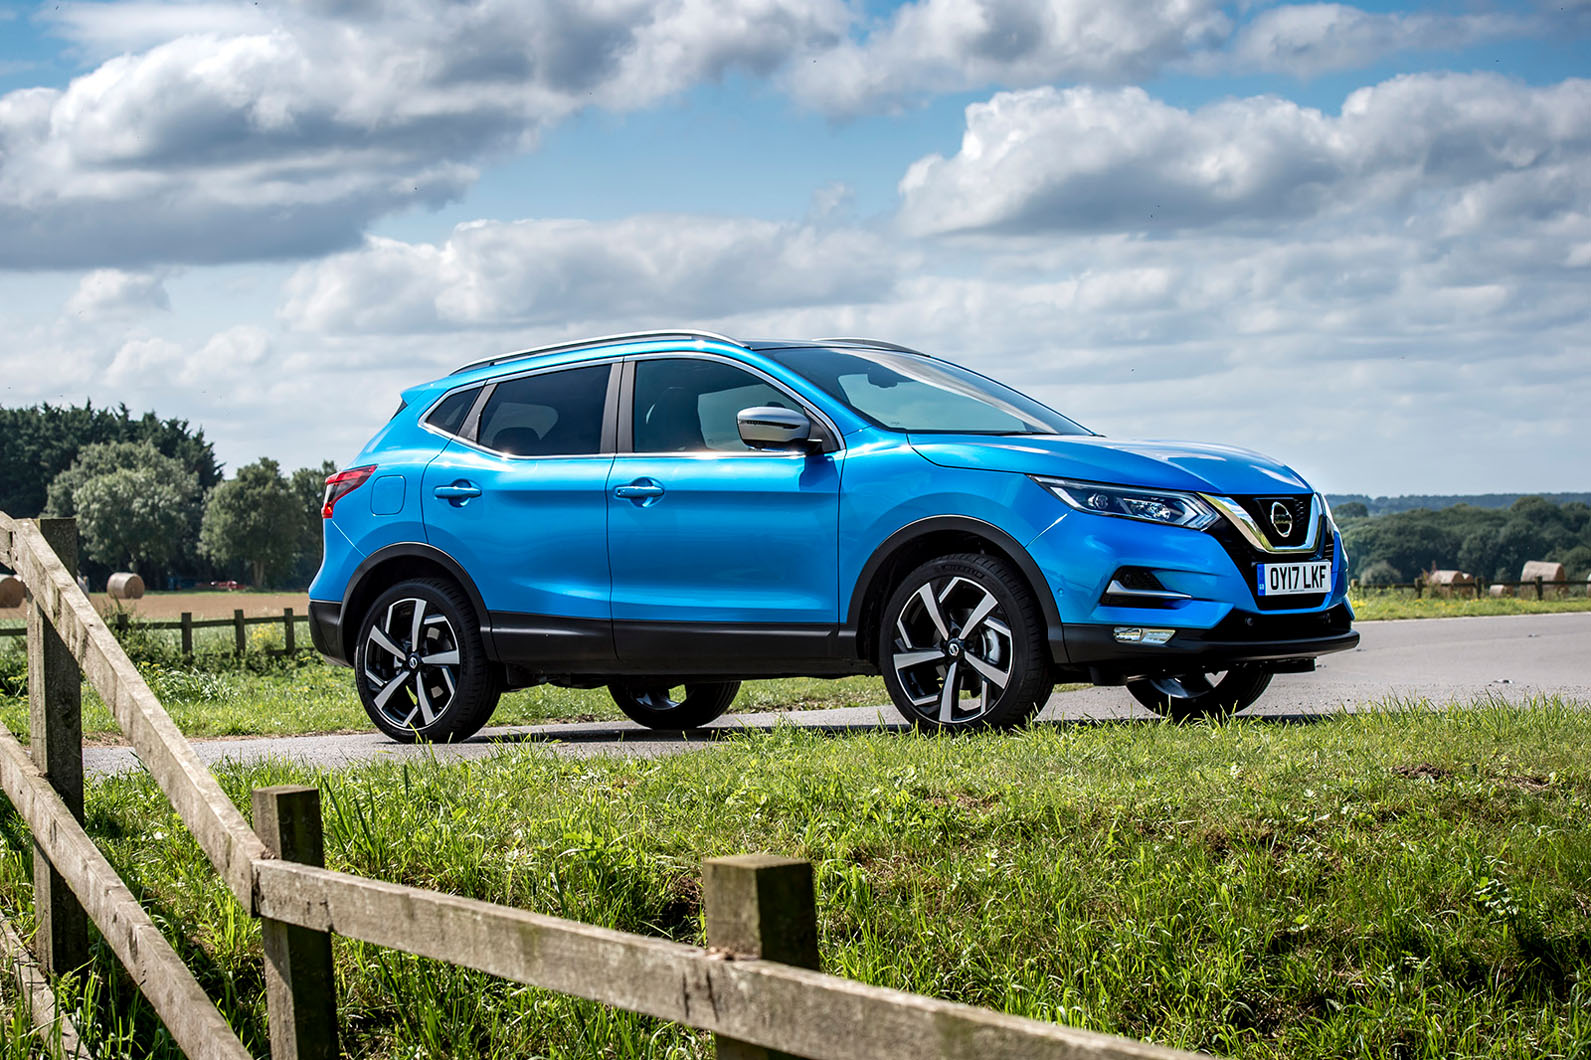 Nissan Qashqai road test review static front